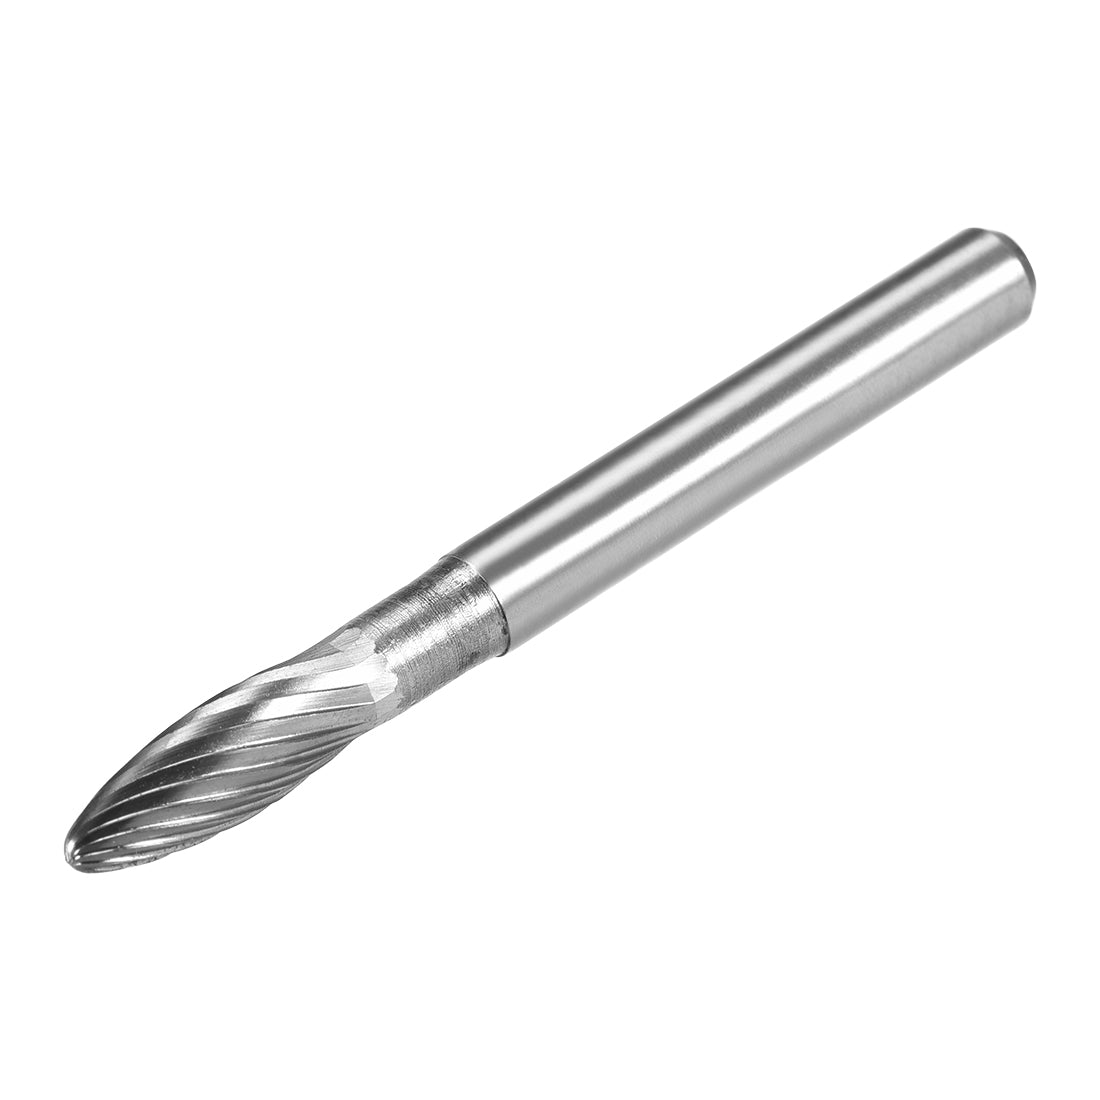 uxcell Uxcell Tungsten Carbide YG8 Single Cut Rotary Burrs File 6mmOval Shape with 1/4" Shank